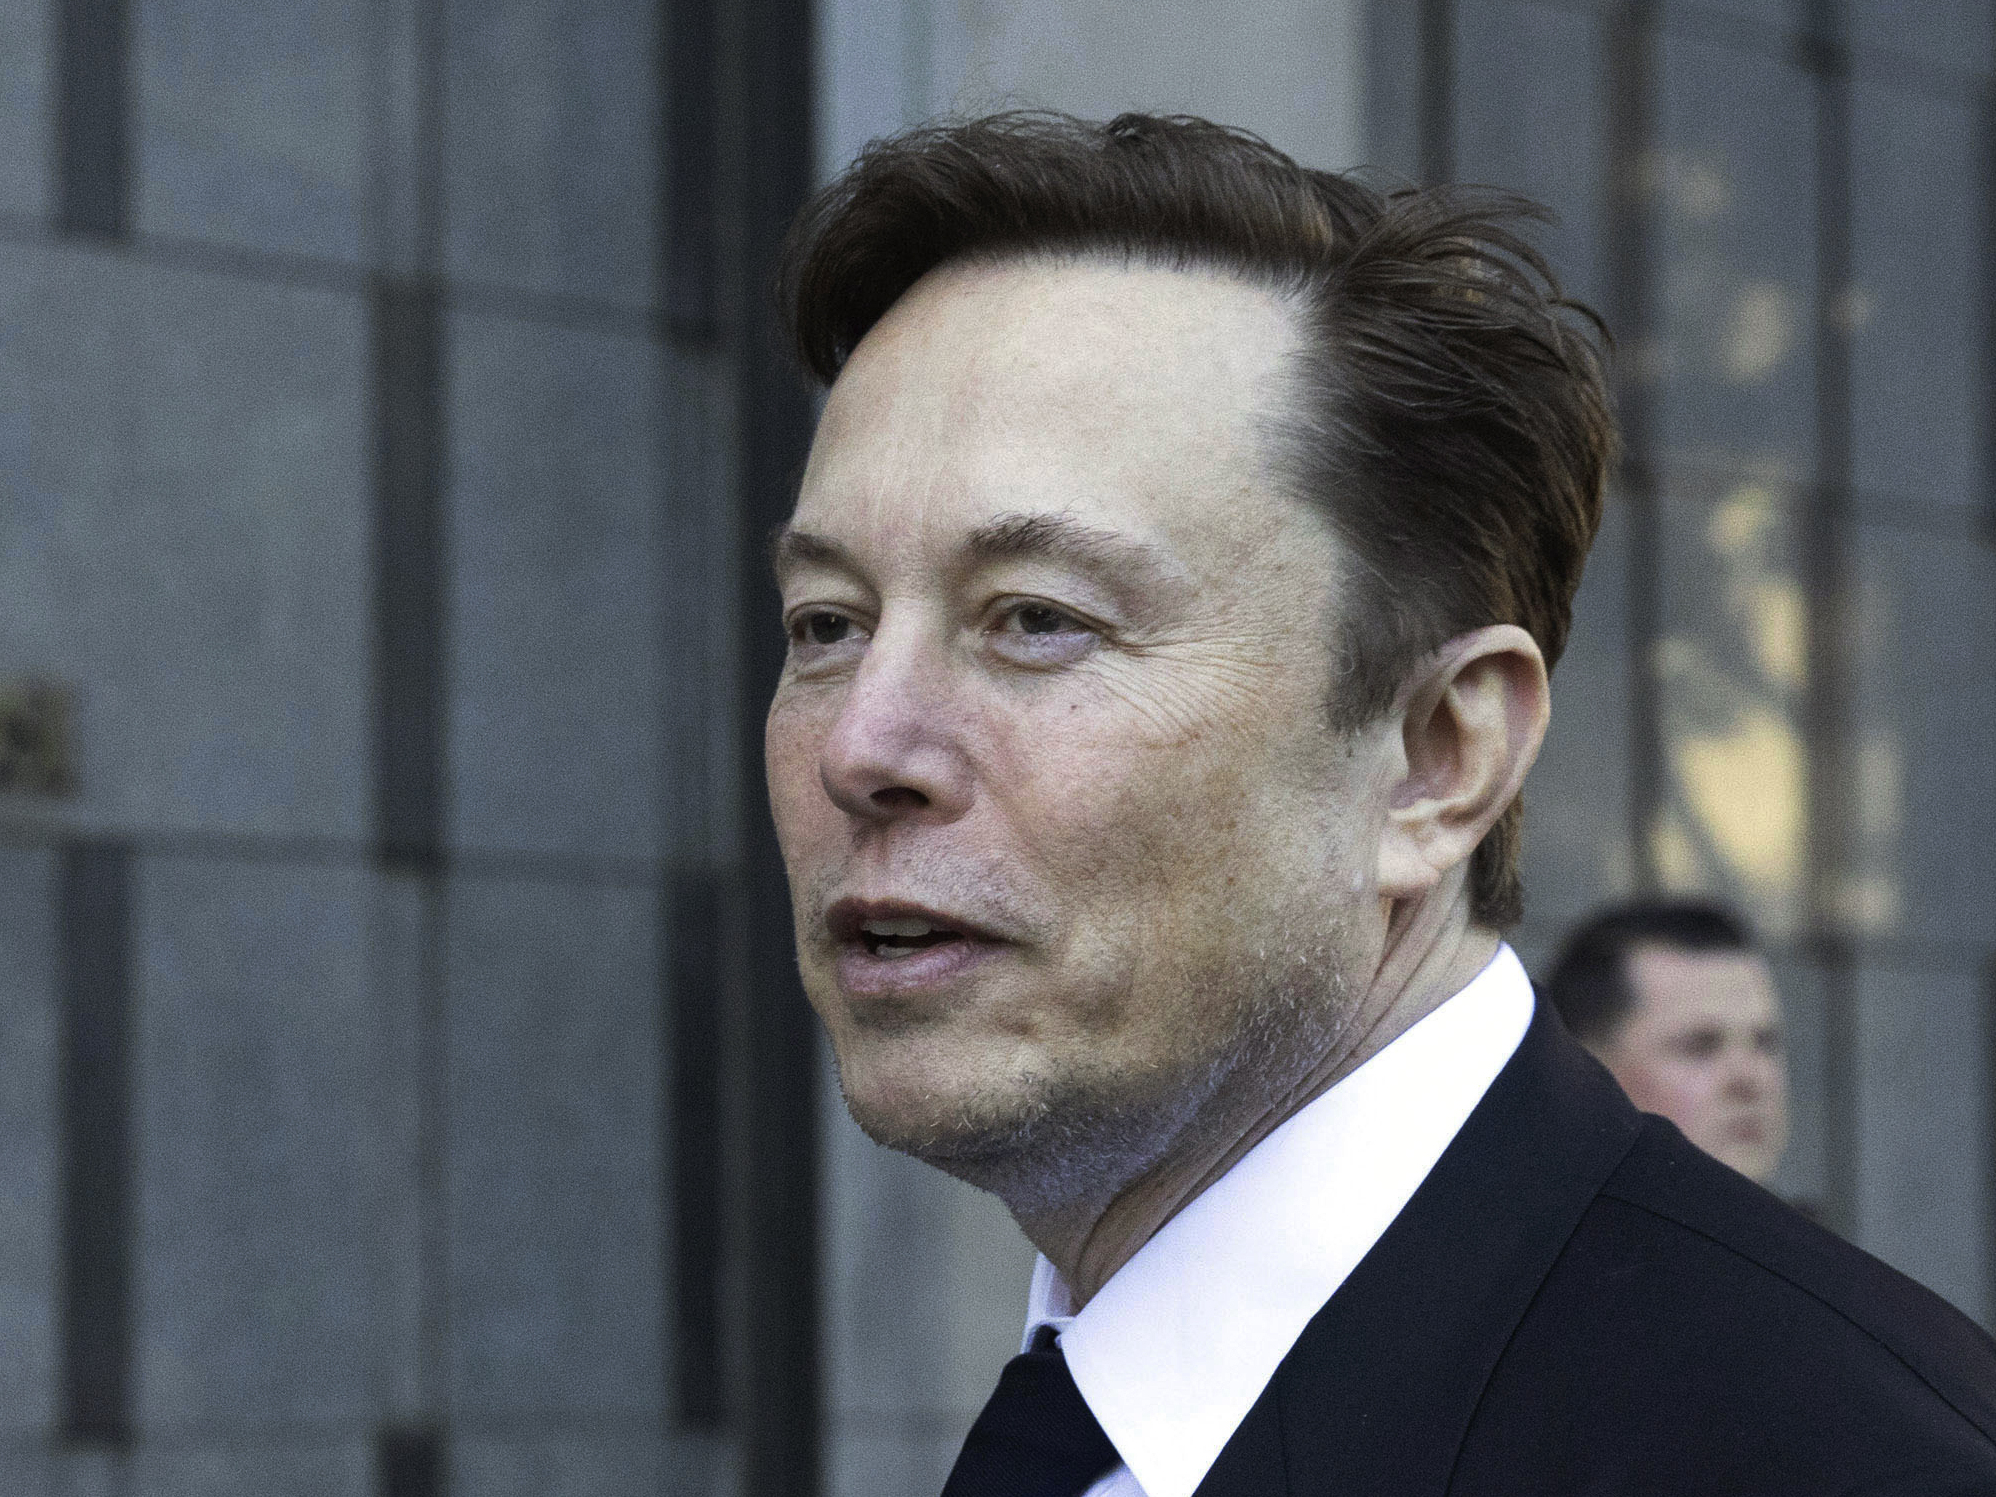 Elon Musk departs the Phillip Burton Federal Building and United States Court House in San Francisco, on Tuesday, Jan. 24, 2023.